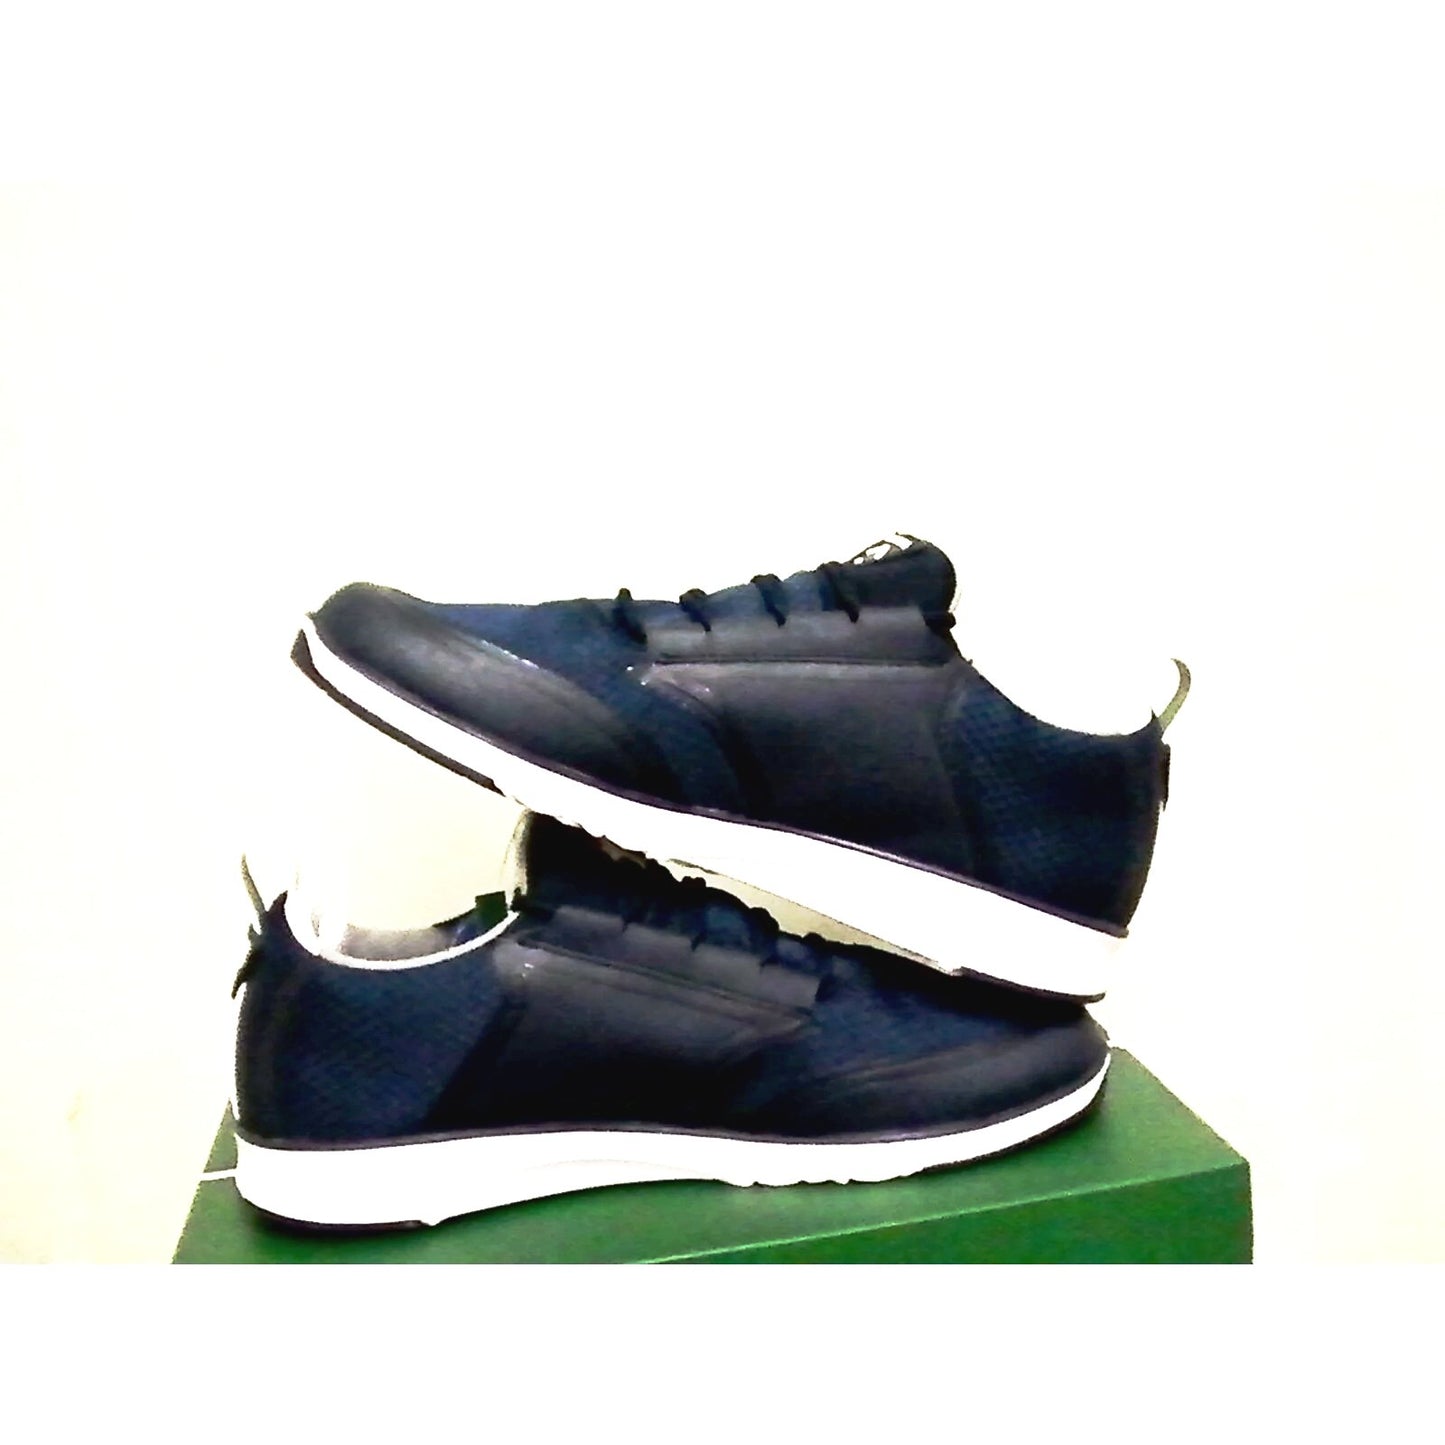 Lacoste shoes L.IGHT LT12 spm txt/syn dark blue training size 9.5 new with box